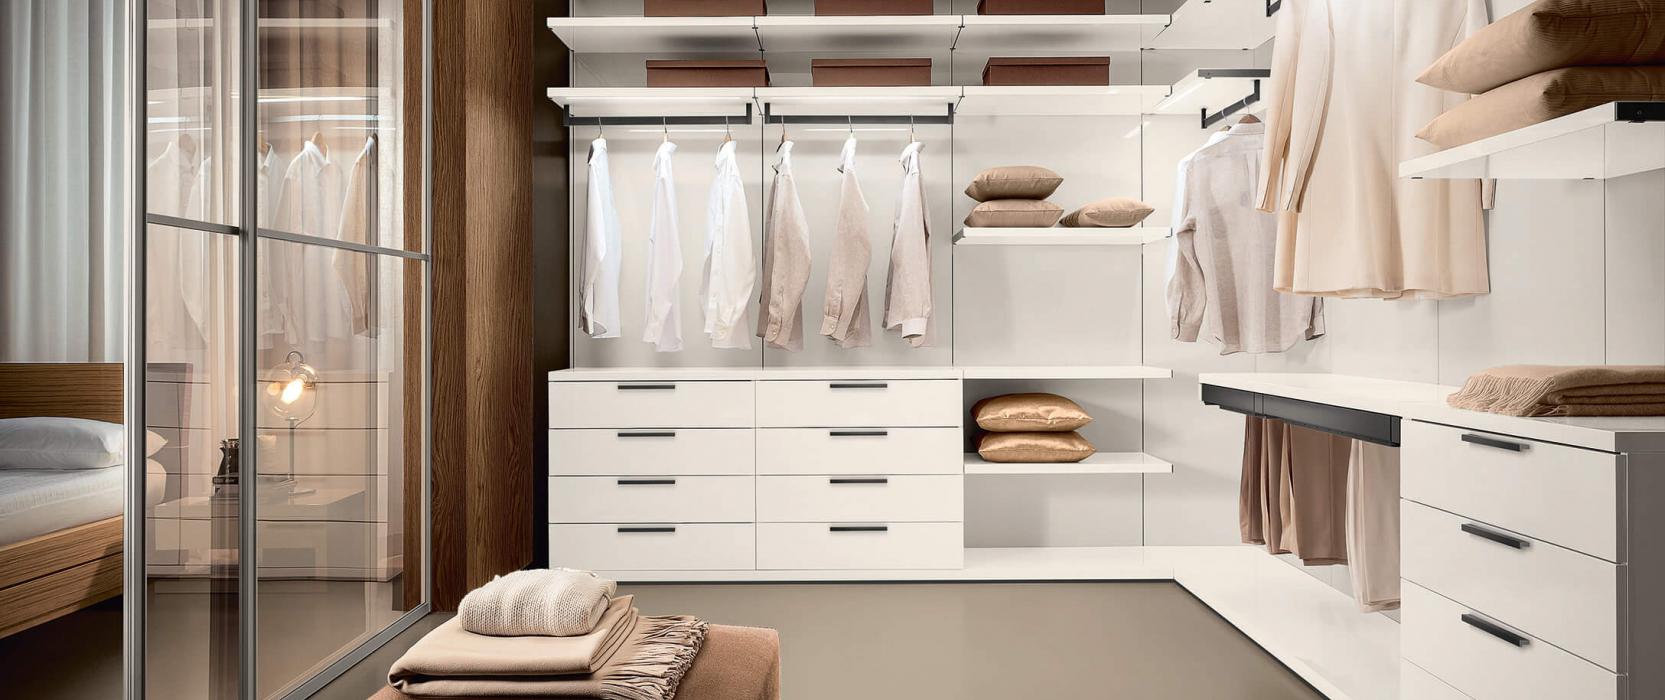 Closet designed by Interiology Design Co. and Composit 